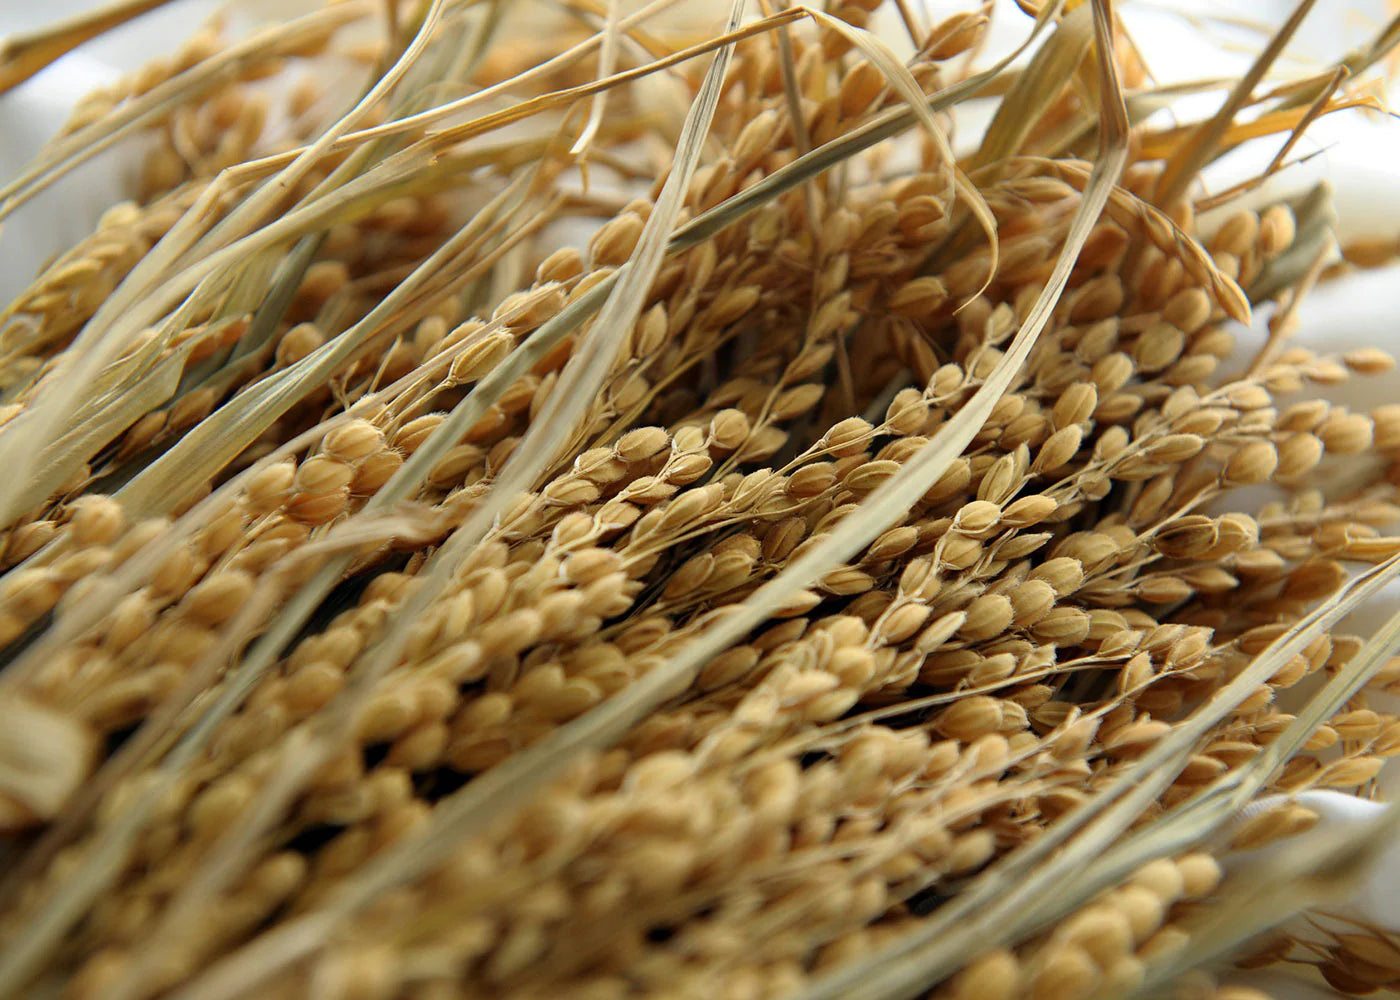 Close-up of a bundle of golden oats with thin, delicate stems and grain-filled husks. The oats are intertwined, creating a dense texture with a warm, earthy color palette. The image highlights the natural detail and intricacy of the grains.